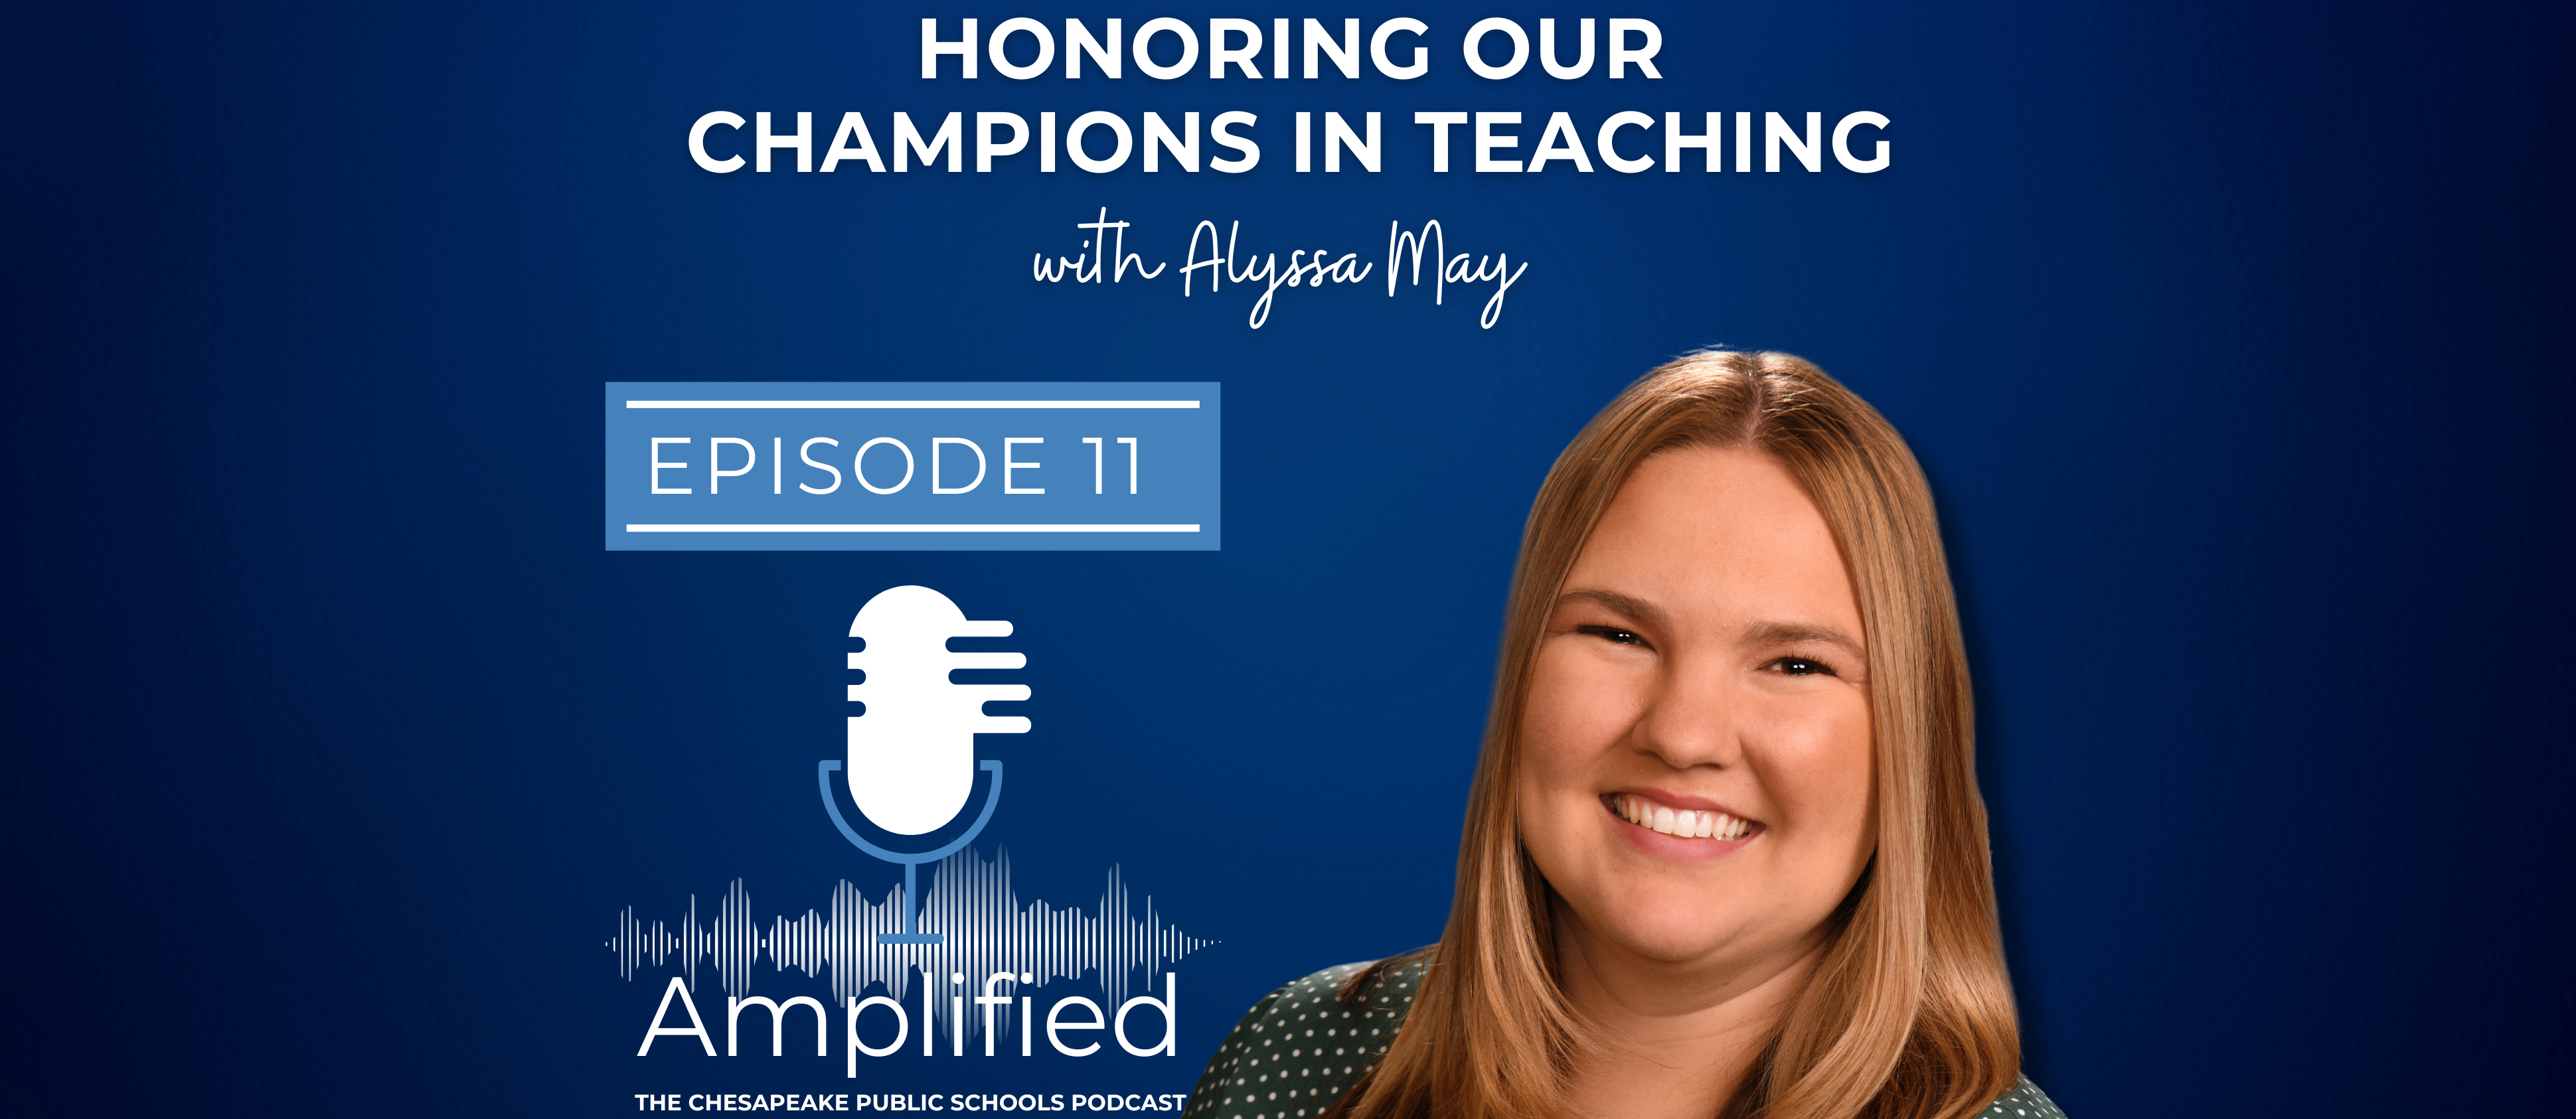 Honoring our champions in education with Alyssa May.   Episode 11. Amplified: The Chesapeake Public Schools Podcast. Profile pictures of Alyssa smiling.